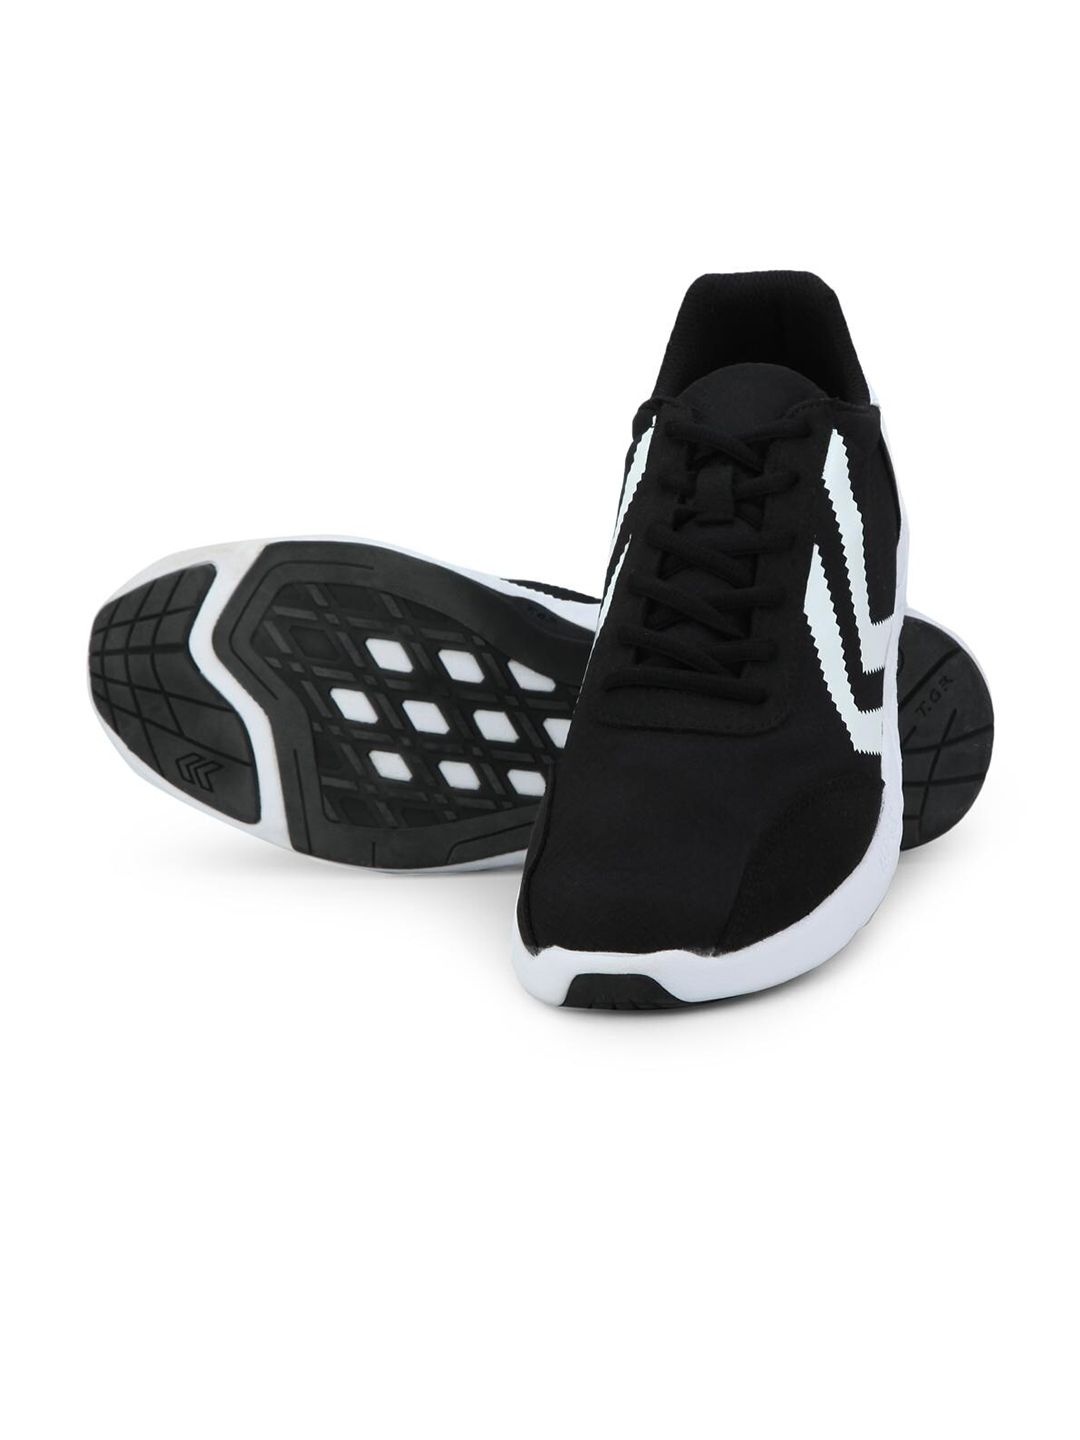 hummel Unisex Black Suede Training or Gym Non-Marking Shoes Price in India